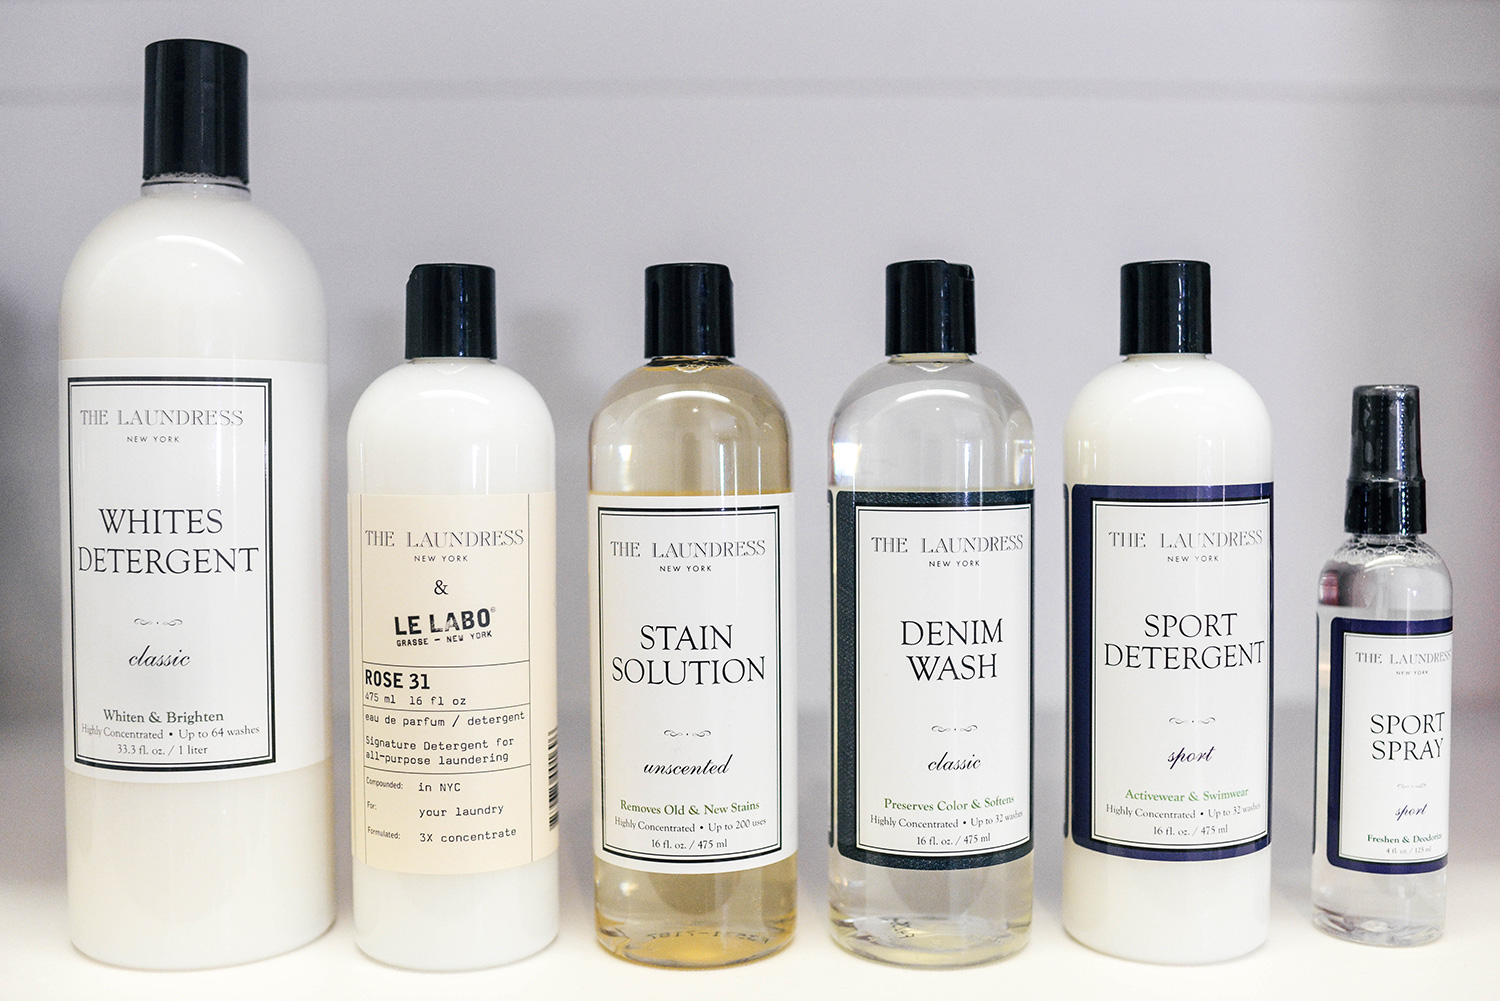 The Laundress Luxury Eco-Friendly Laundry and Cleaning Products